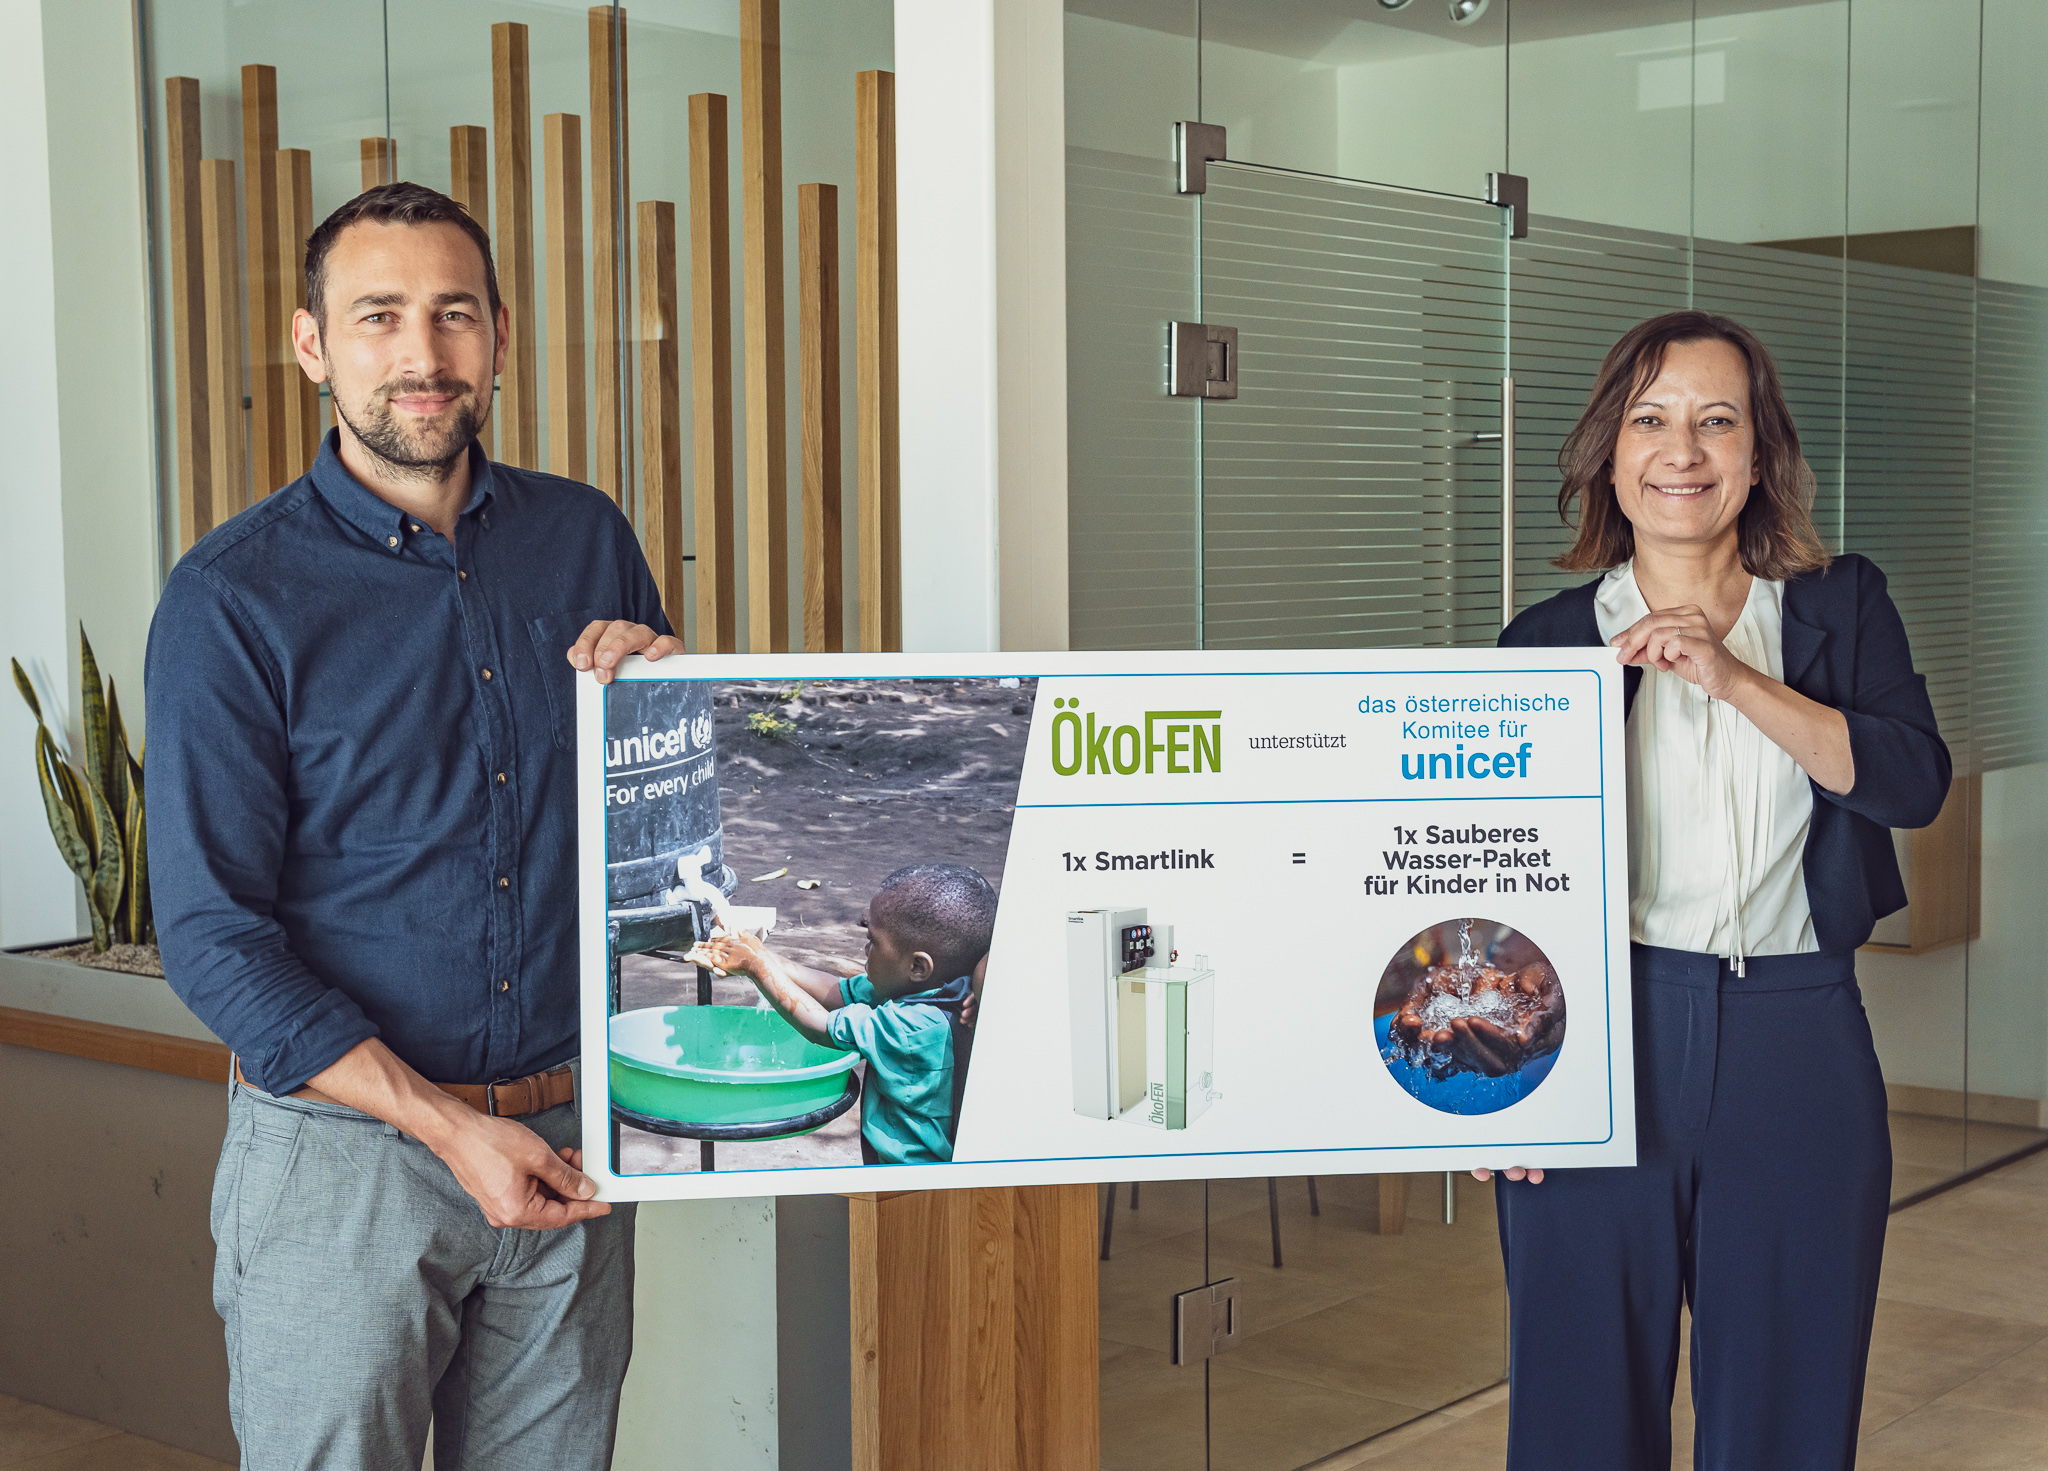 For clean water in crisis areas - ÖkoFEN expands cooperation with UNICEF Austria